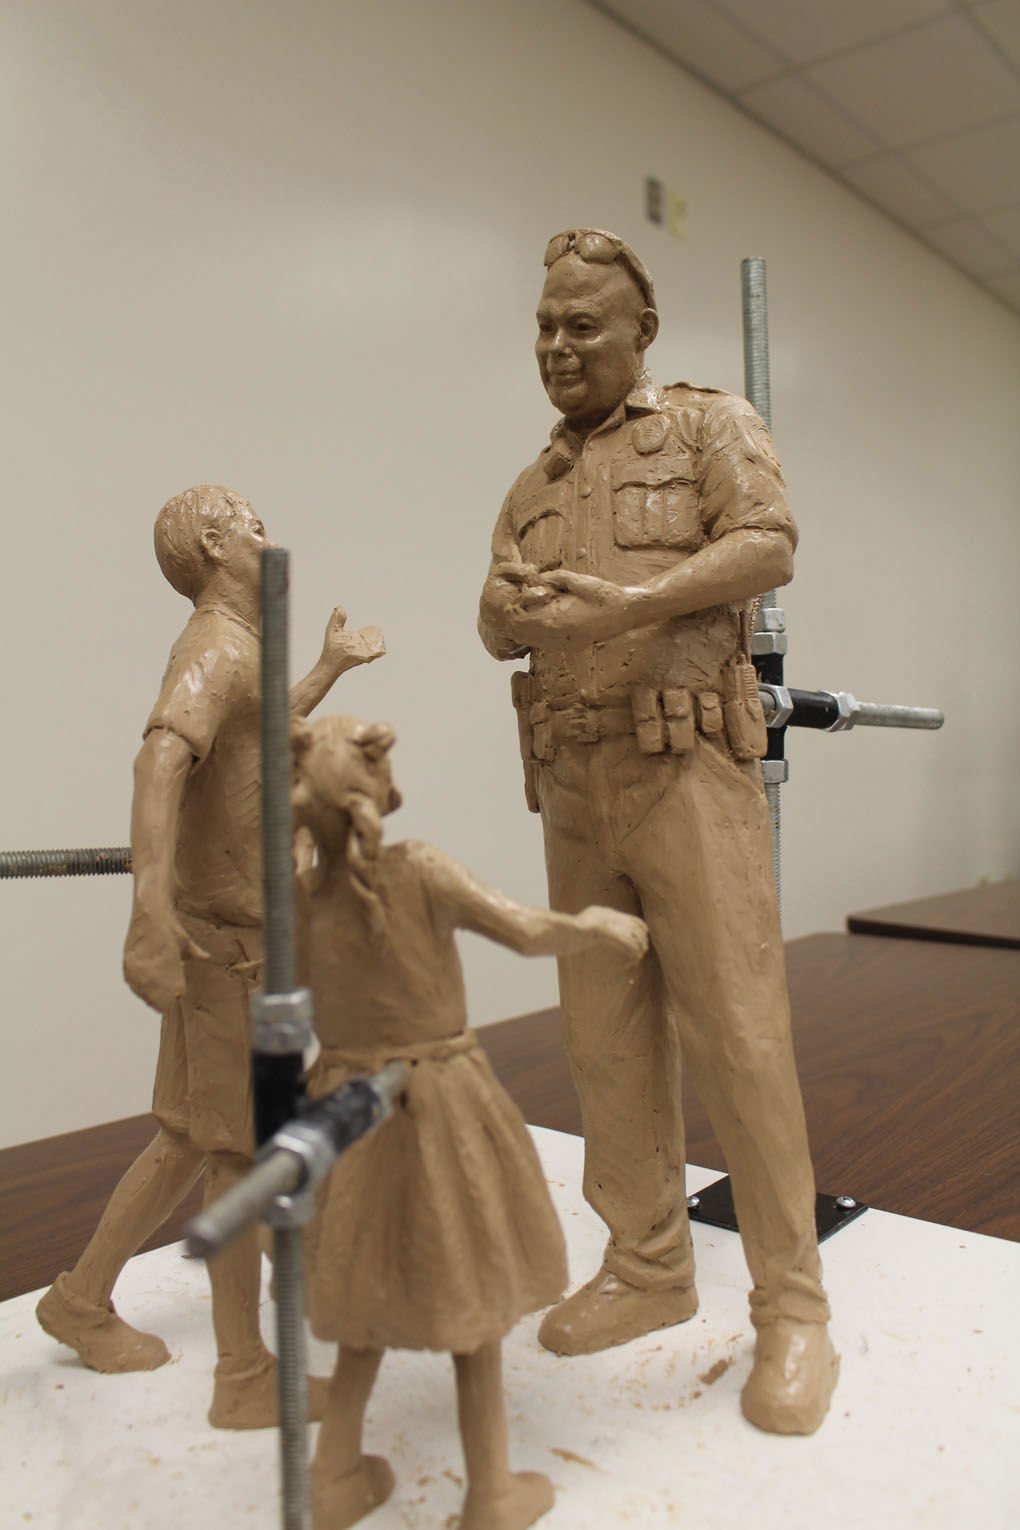 A bronze statue of Officer Brent Thompson with two children is in the works for downtown